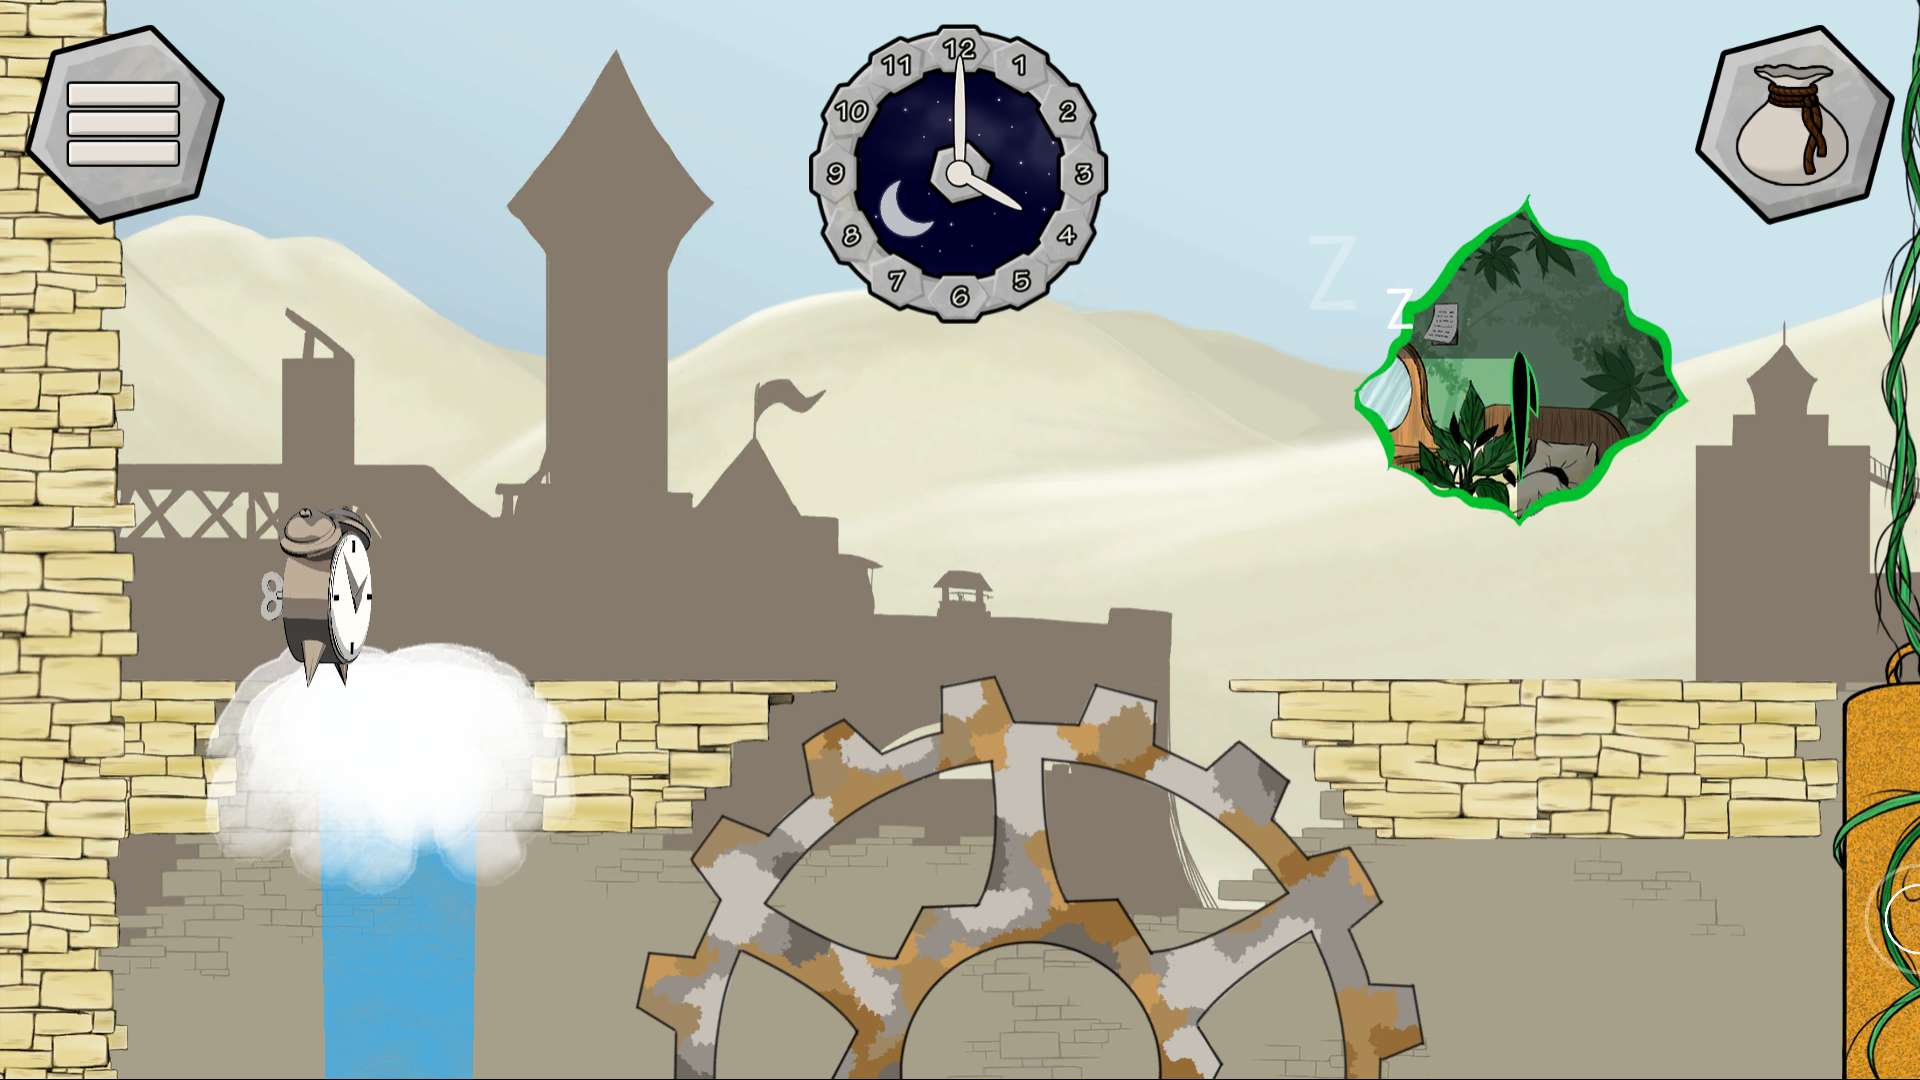 Screenshot of the game WAKE. It shows a level with a sand desert setting from a 2D side-scrolling perspective. At the left side an alarm clock stands on top of a water fountain. In the center is a giant gear that the alarm clock needs to cross to reach a green window on the oder side. The window displays a certain time frame and little 'Z's arise from it to suggest the person asleep behind the window. The UI at the top of the screen displays a menu button, the current time and an inventory.